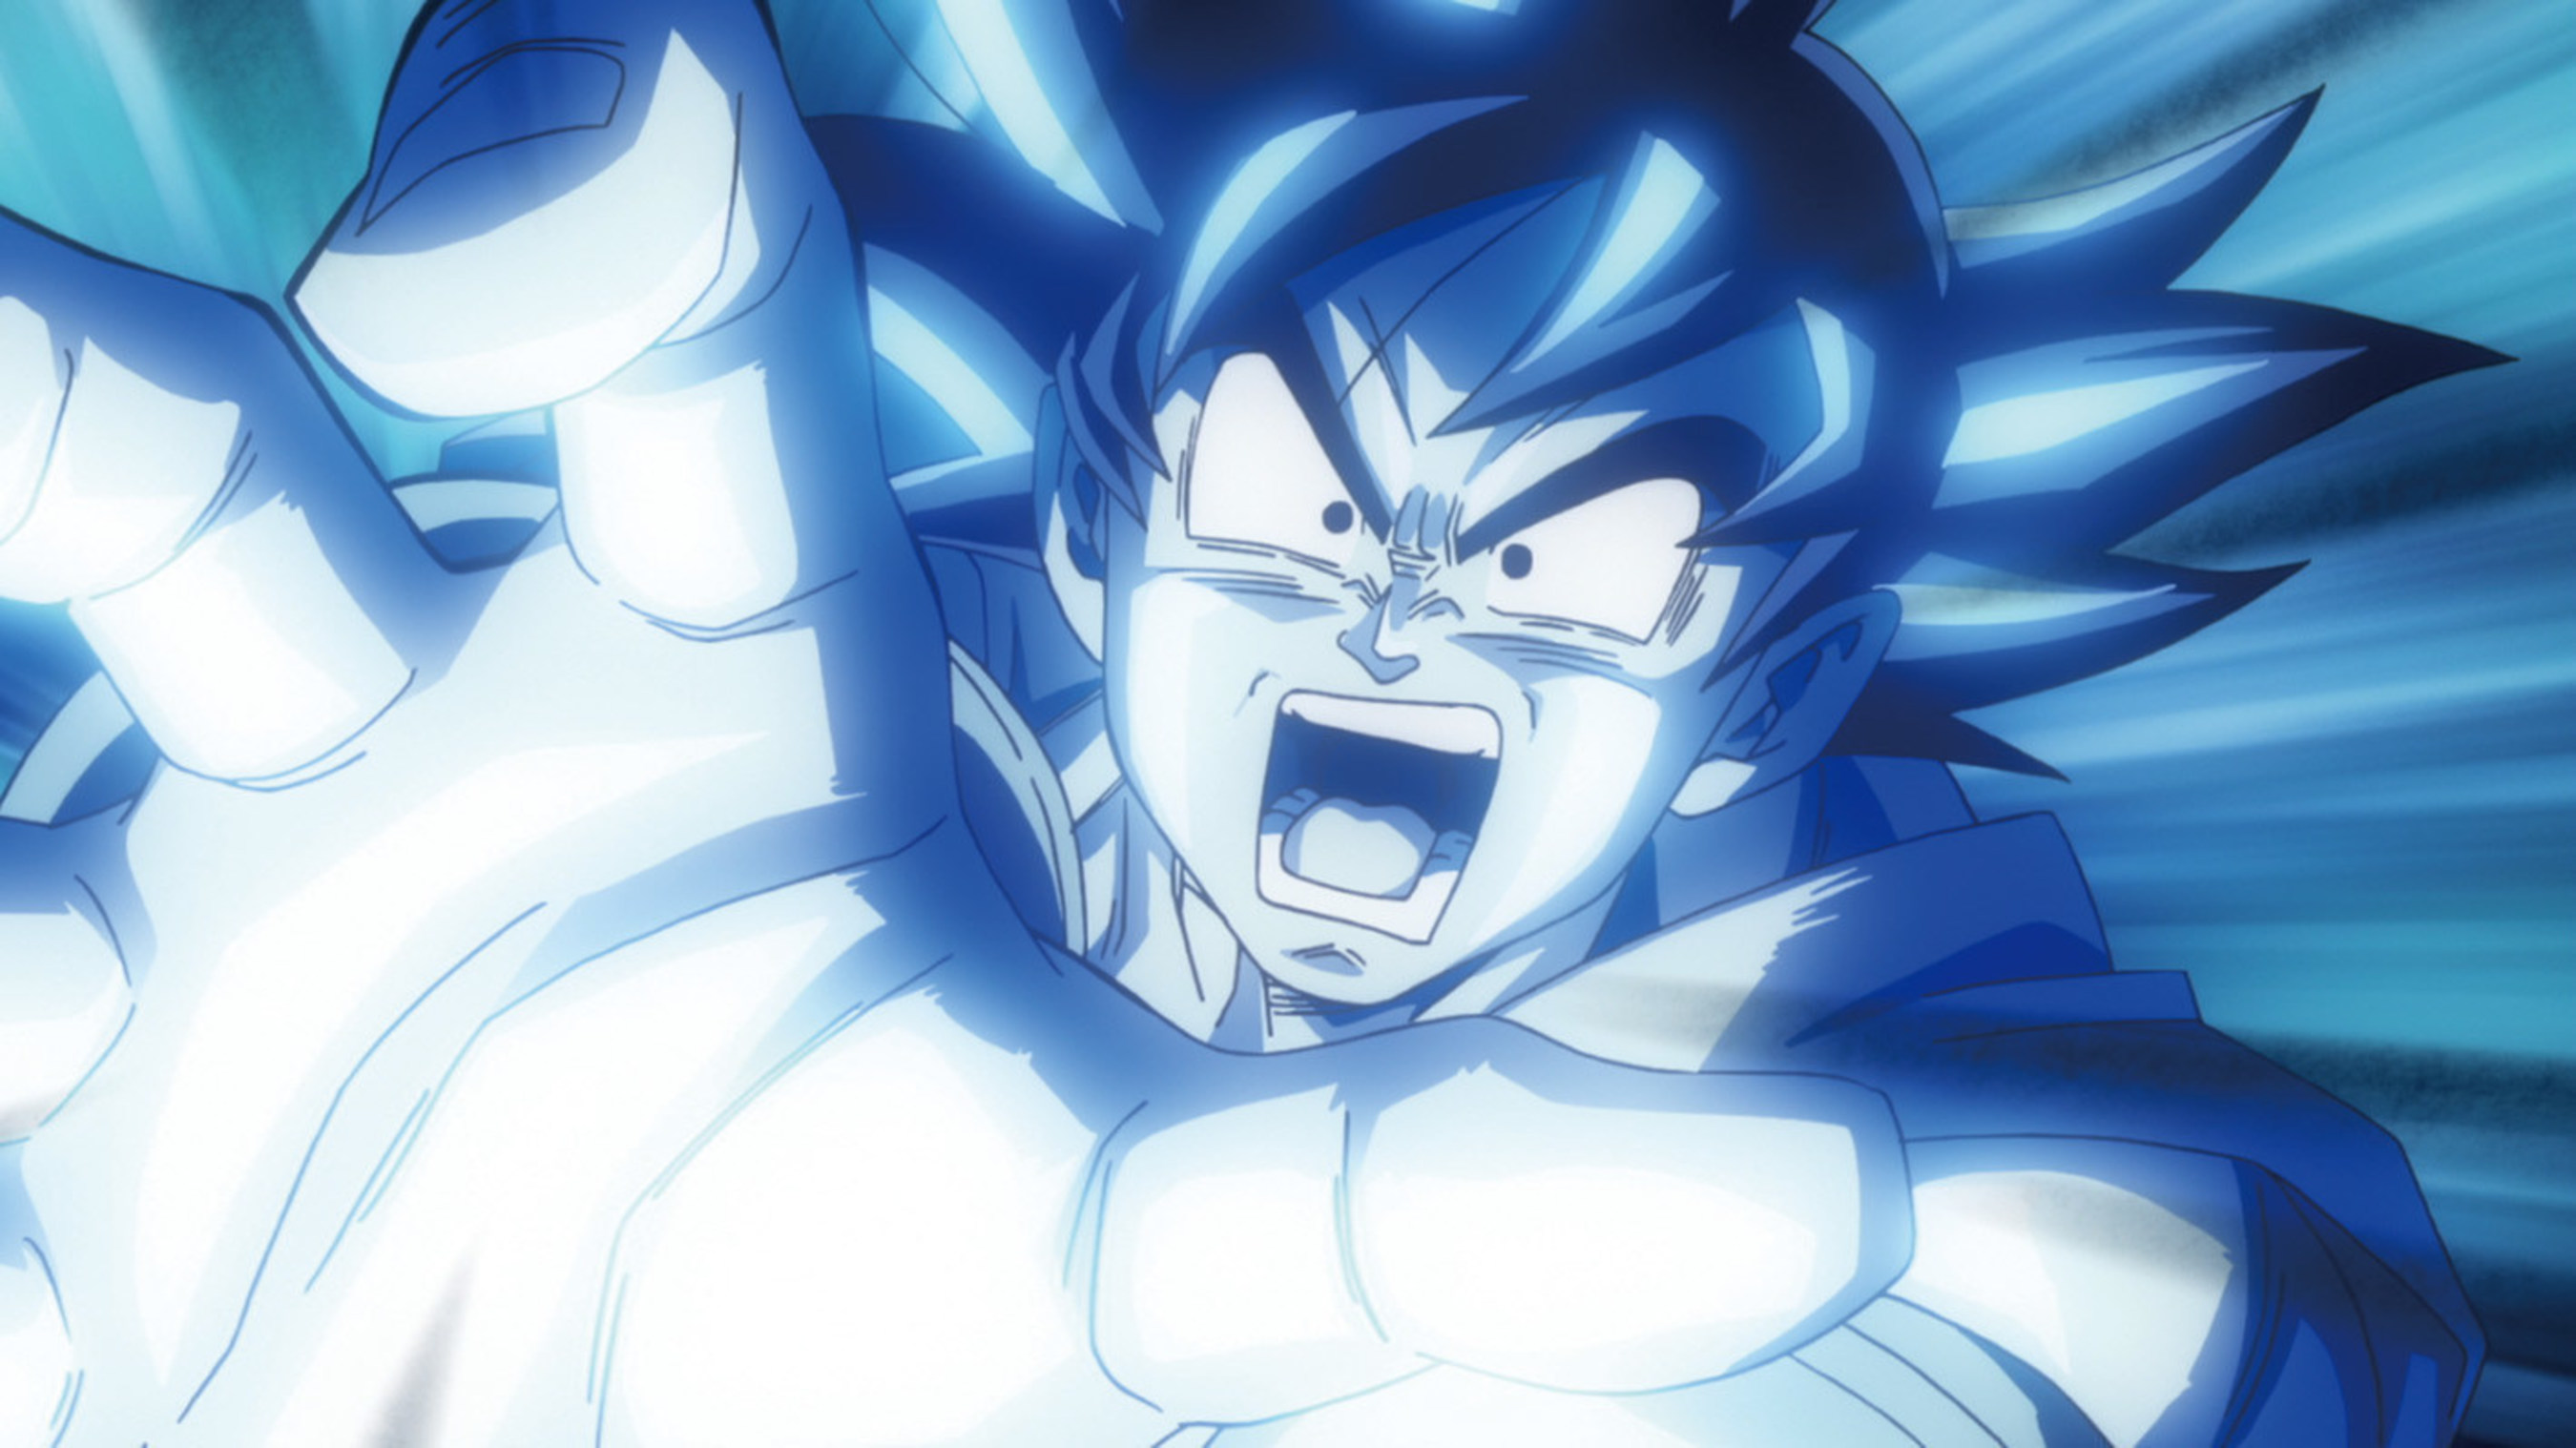 Dragon Ball Z: Resurrection 'F' In Theaters August 4, 2015